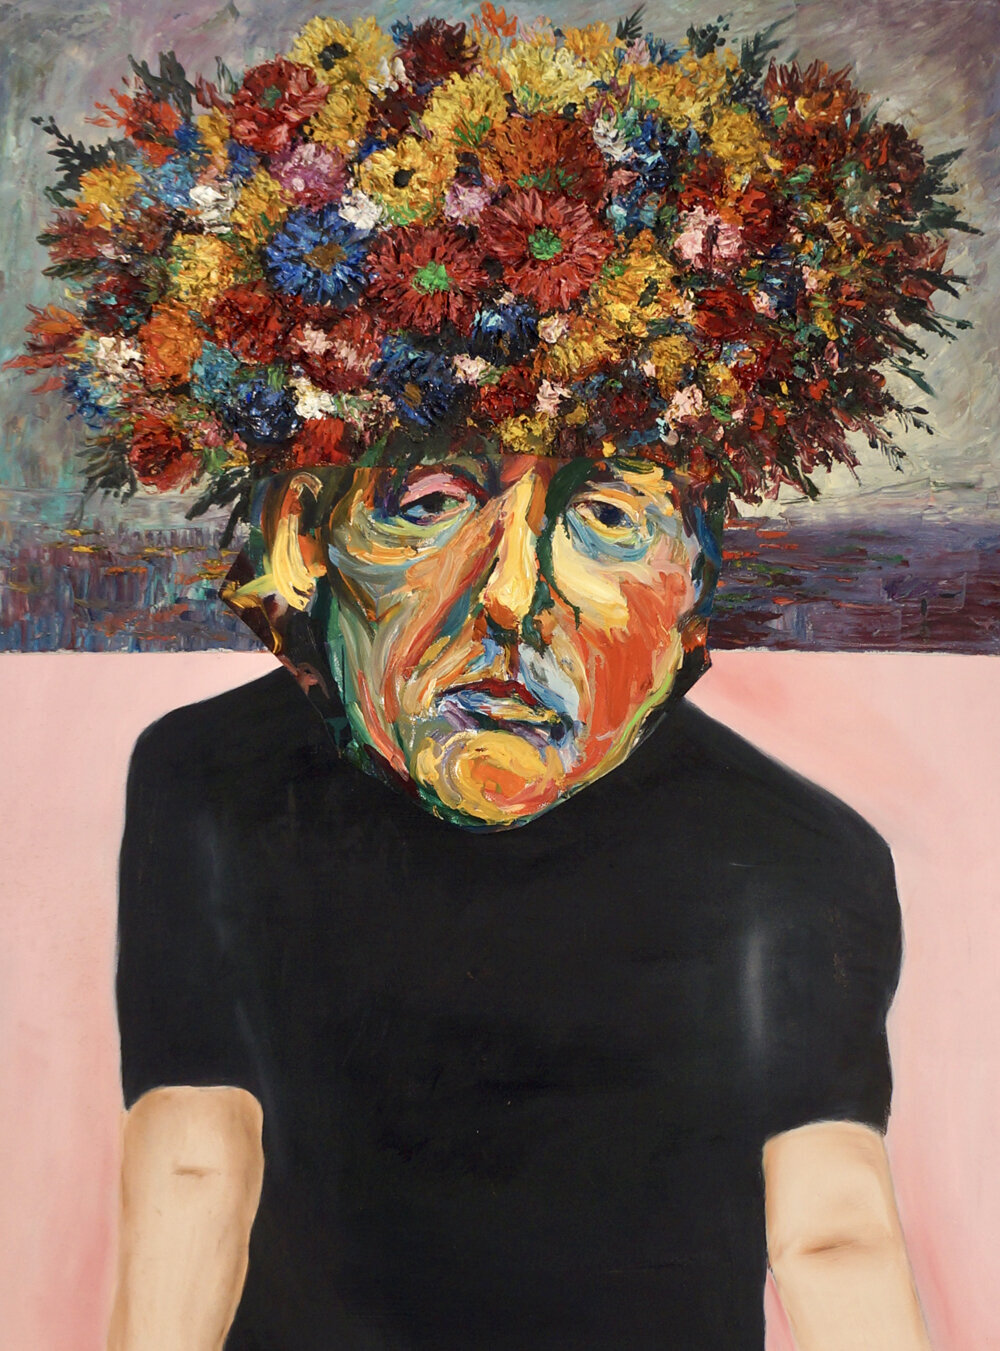 "Young Man with a Bouquet of his own Thoughts" by John Baker